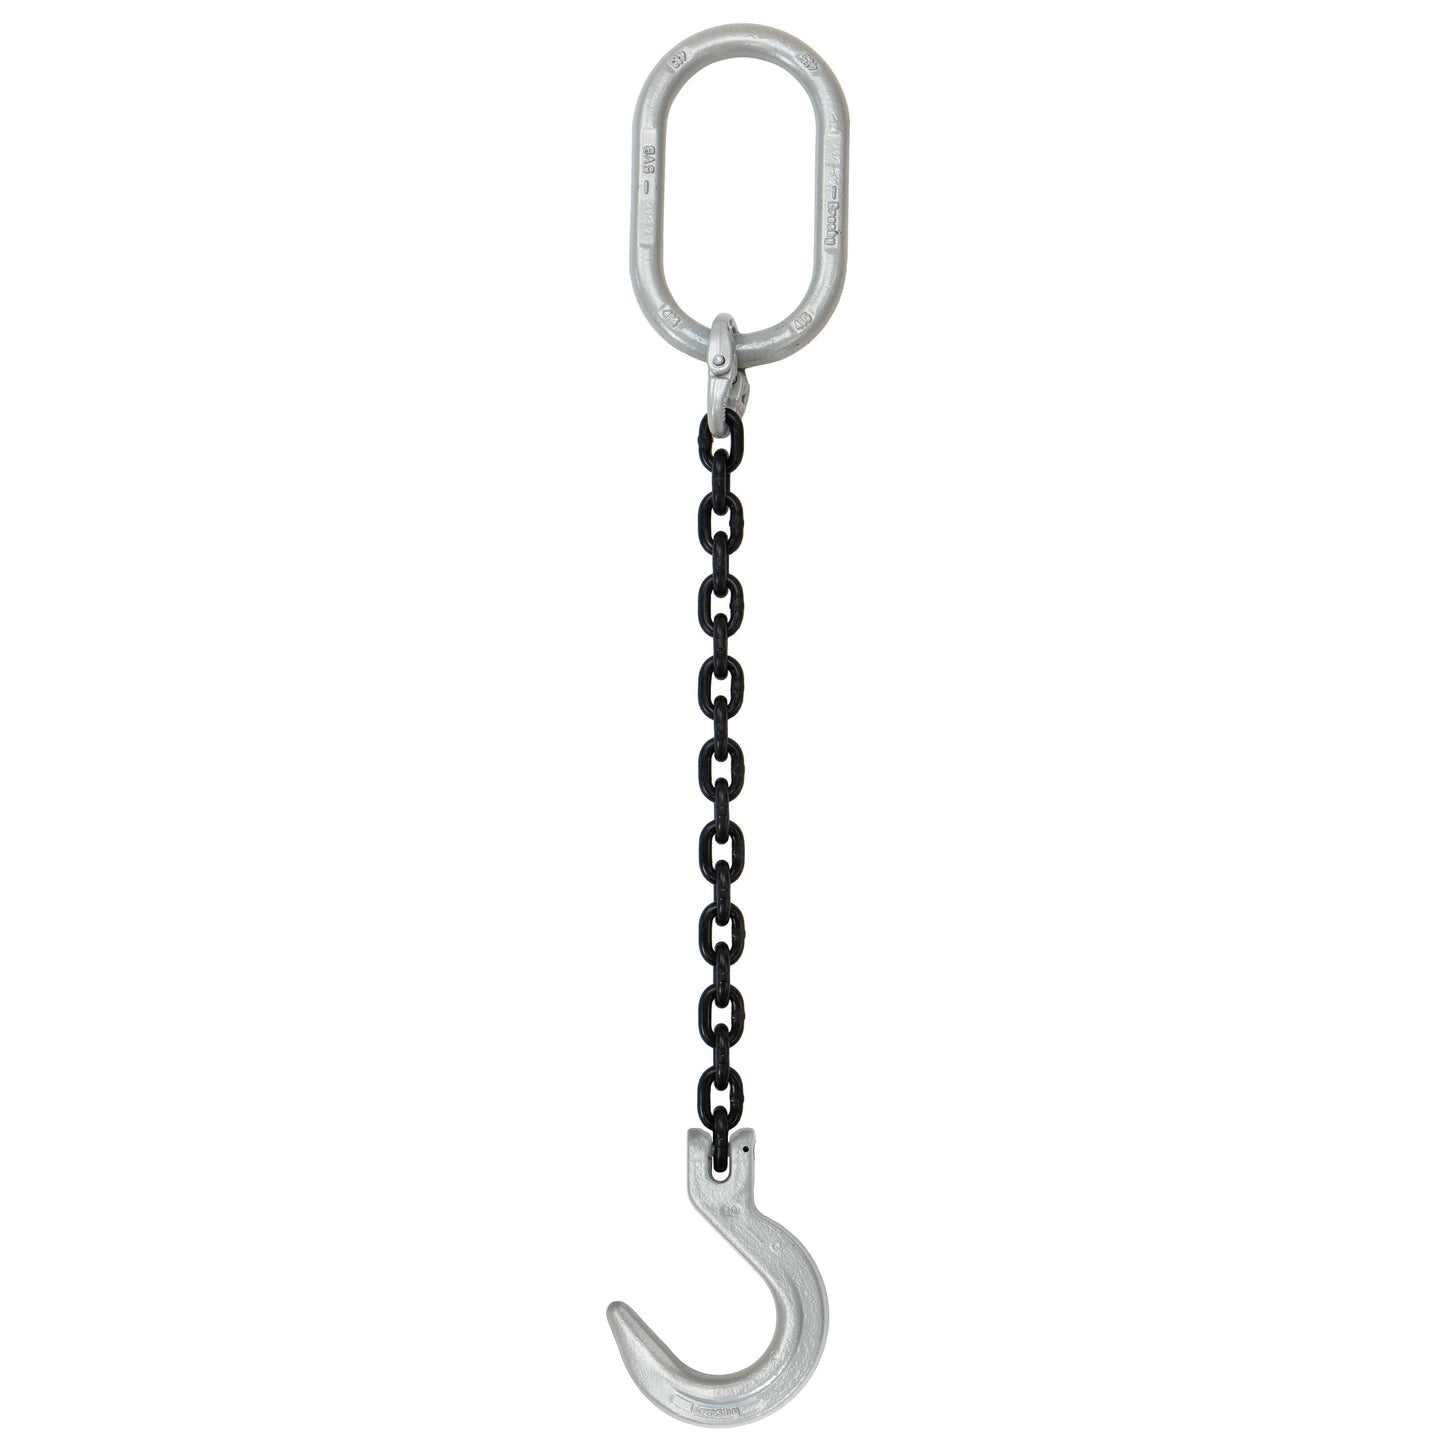 38 inch x 14 foot Domestic Single Leg Chain Sling w Crosby Foundry Hook Grade 100 image 1 of 2